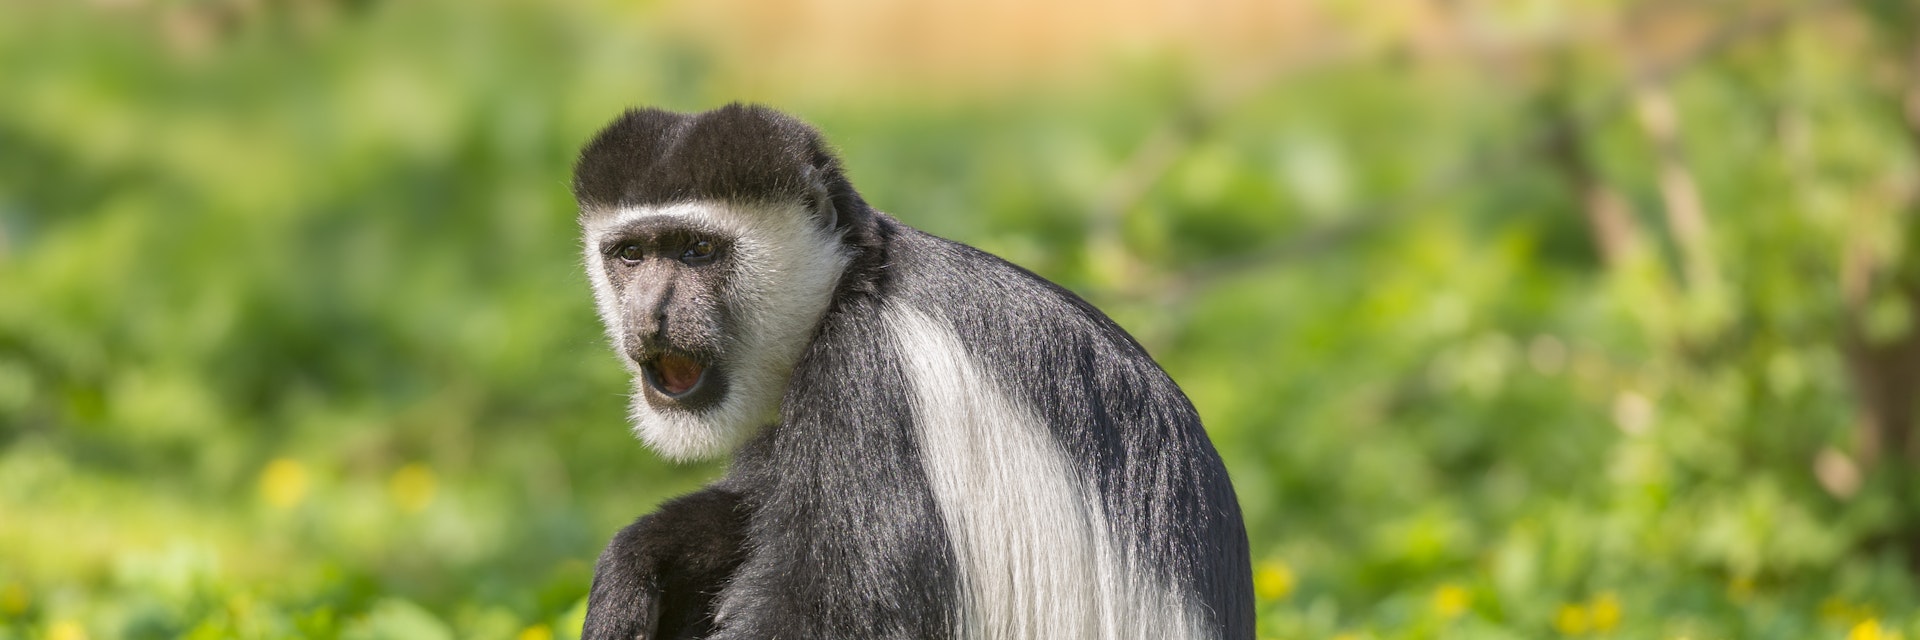 Mantled guereza also know as the black-and-white colobus monkey